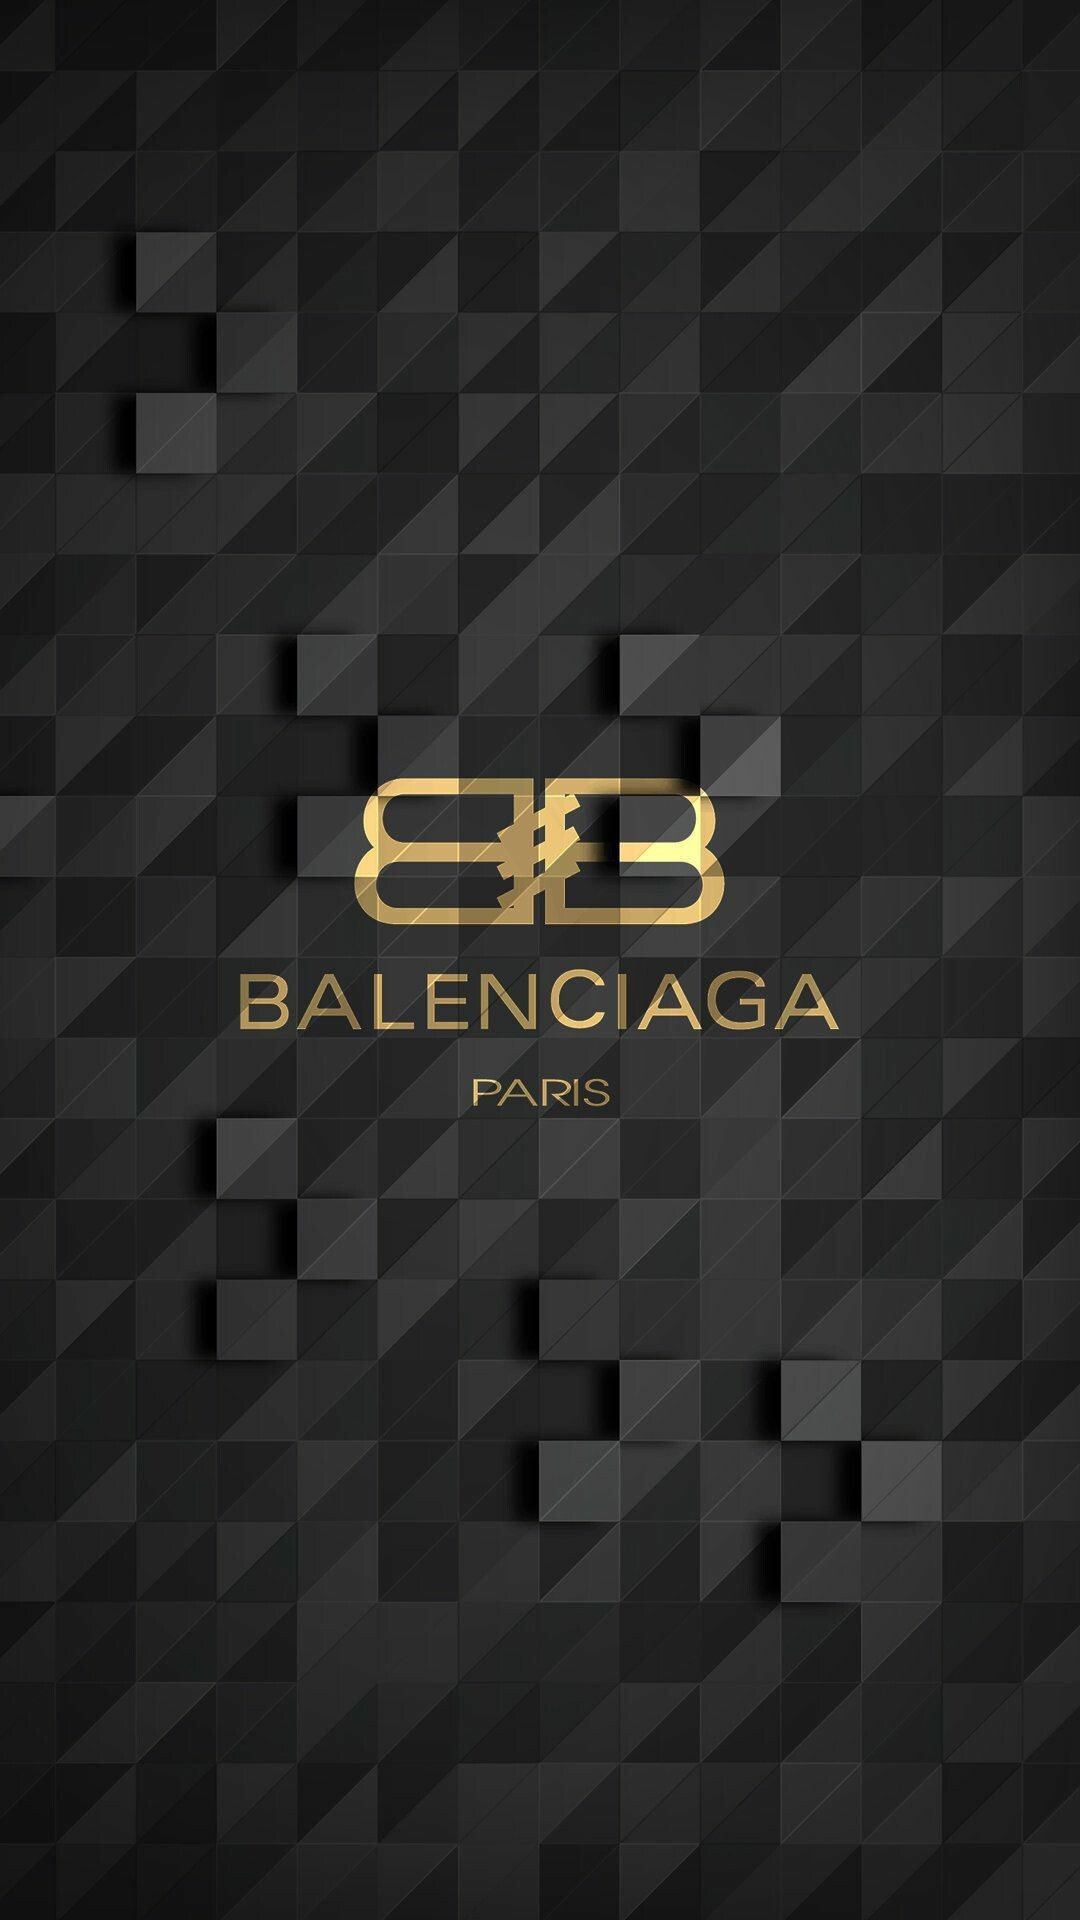 Balenciaga: The part of Kering, the French luxury conglomerate. 1080x1920 Full HD Wallpaper.